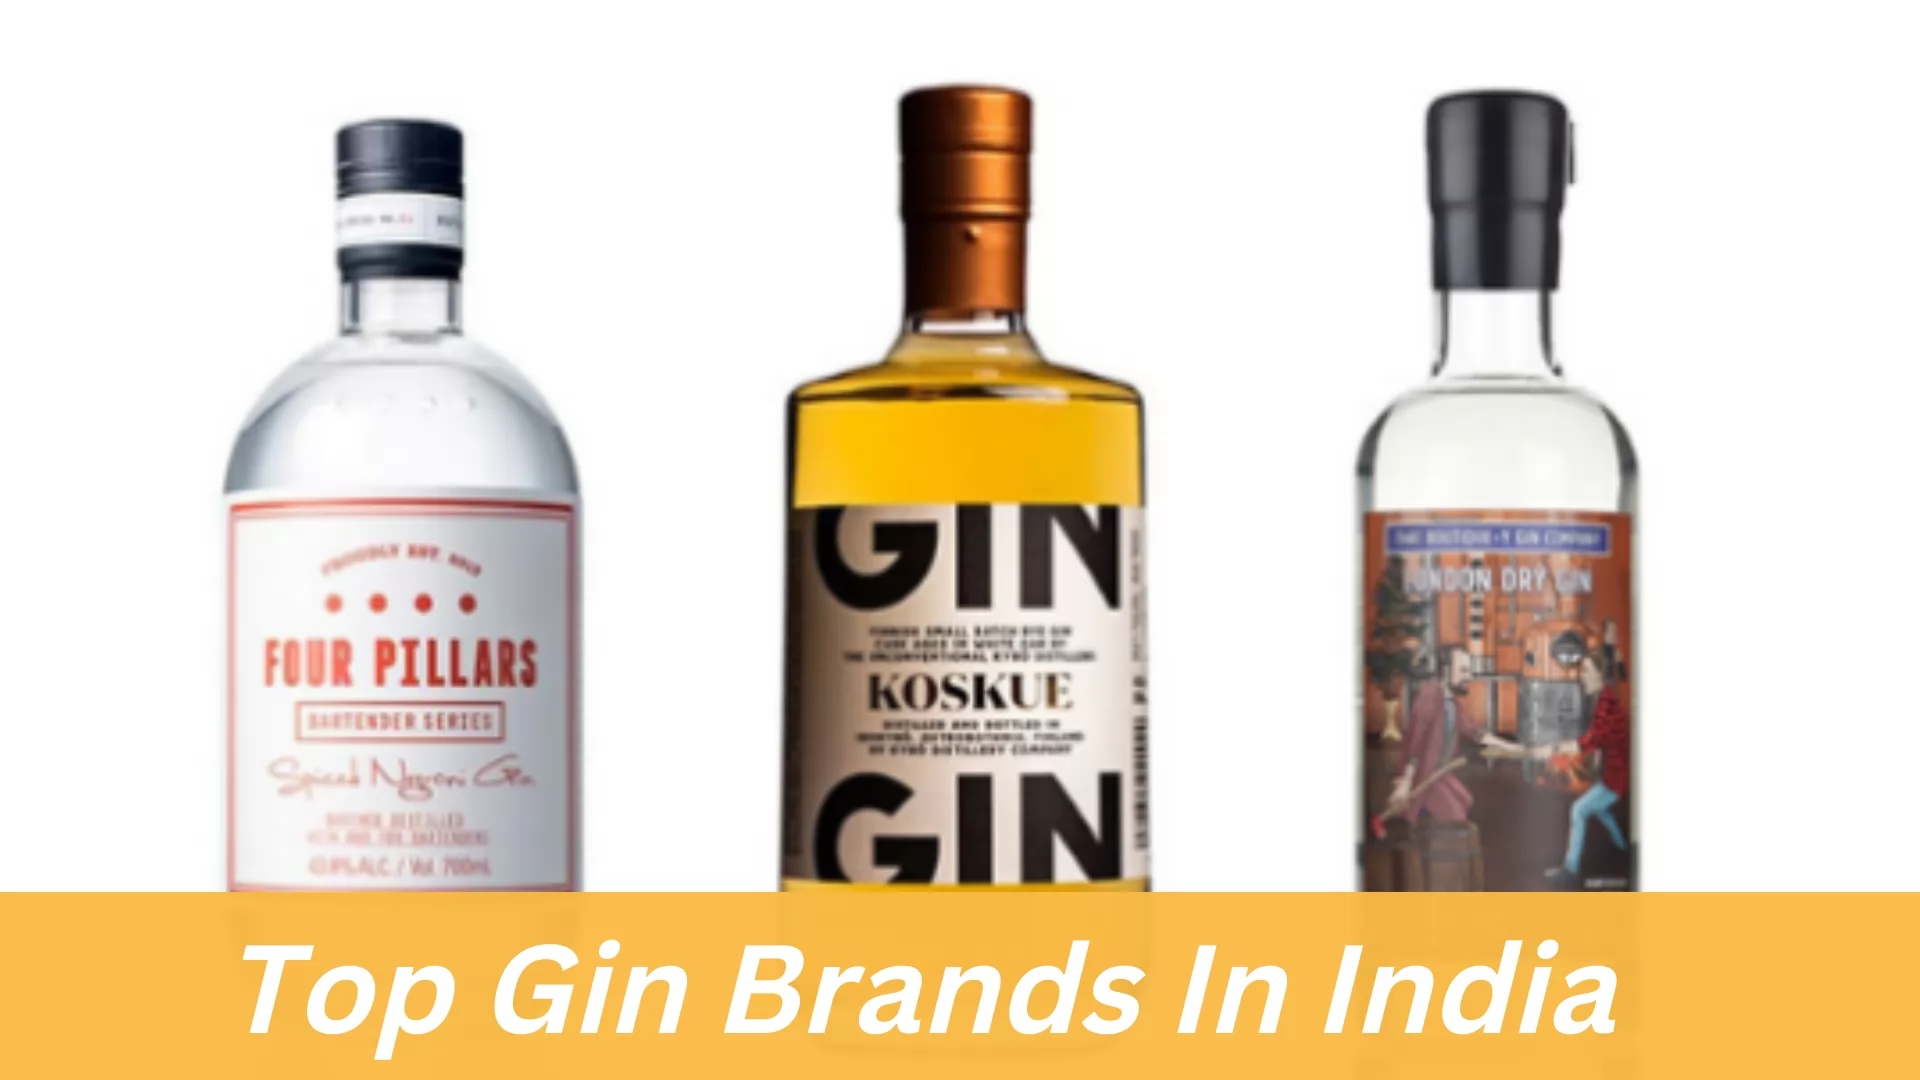 Top Gin Brands in India